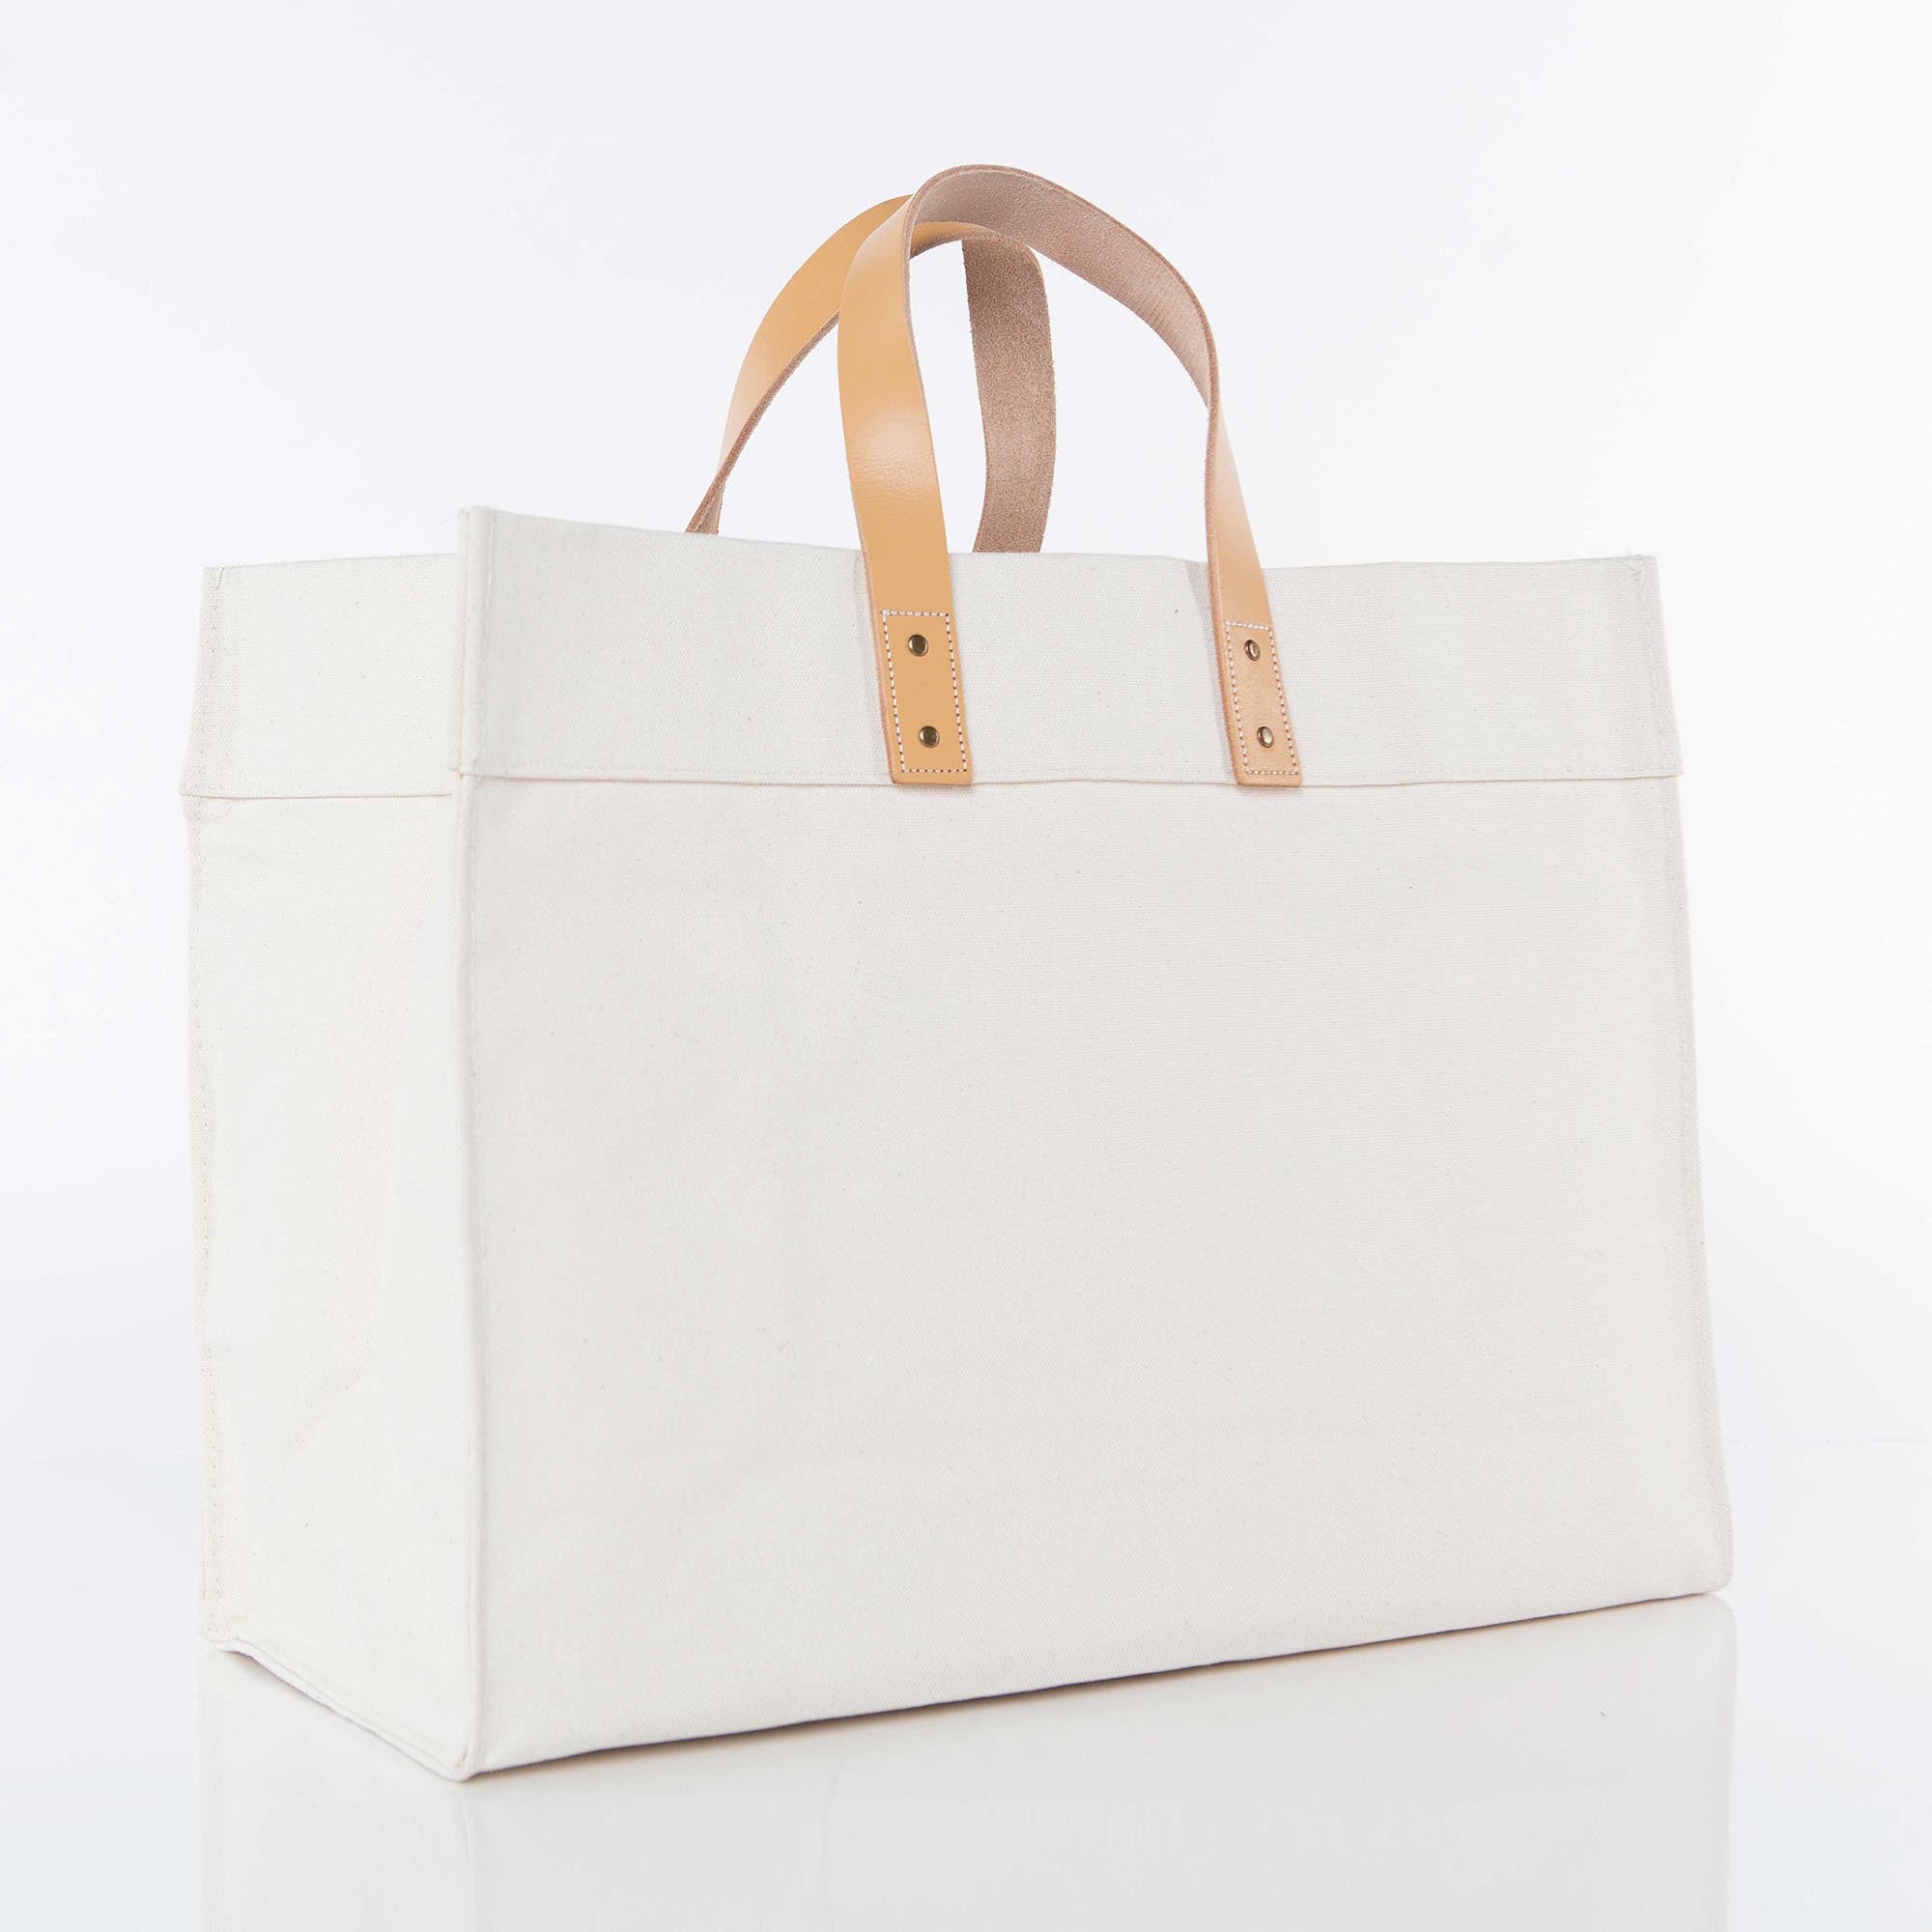 Love Monogram Canvas Tote Bag With Leather Straps